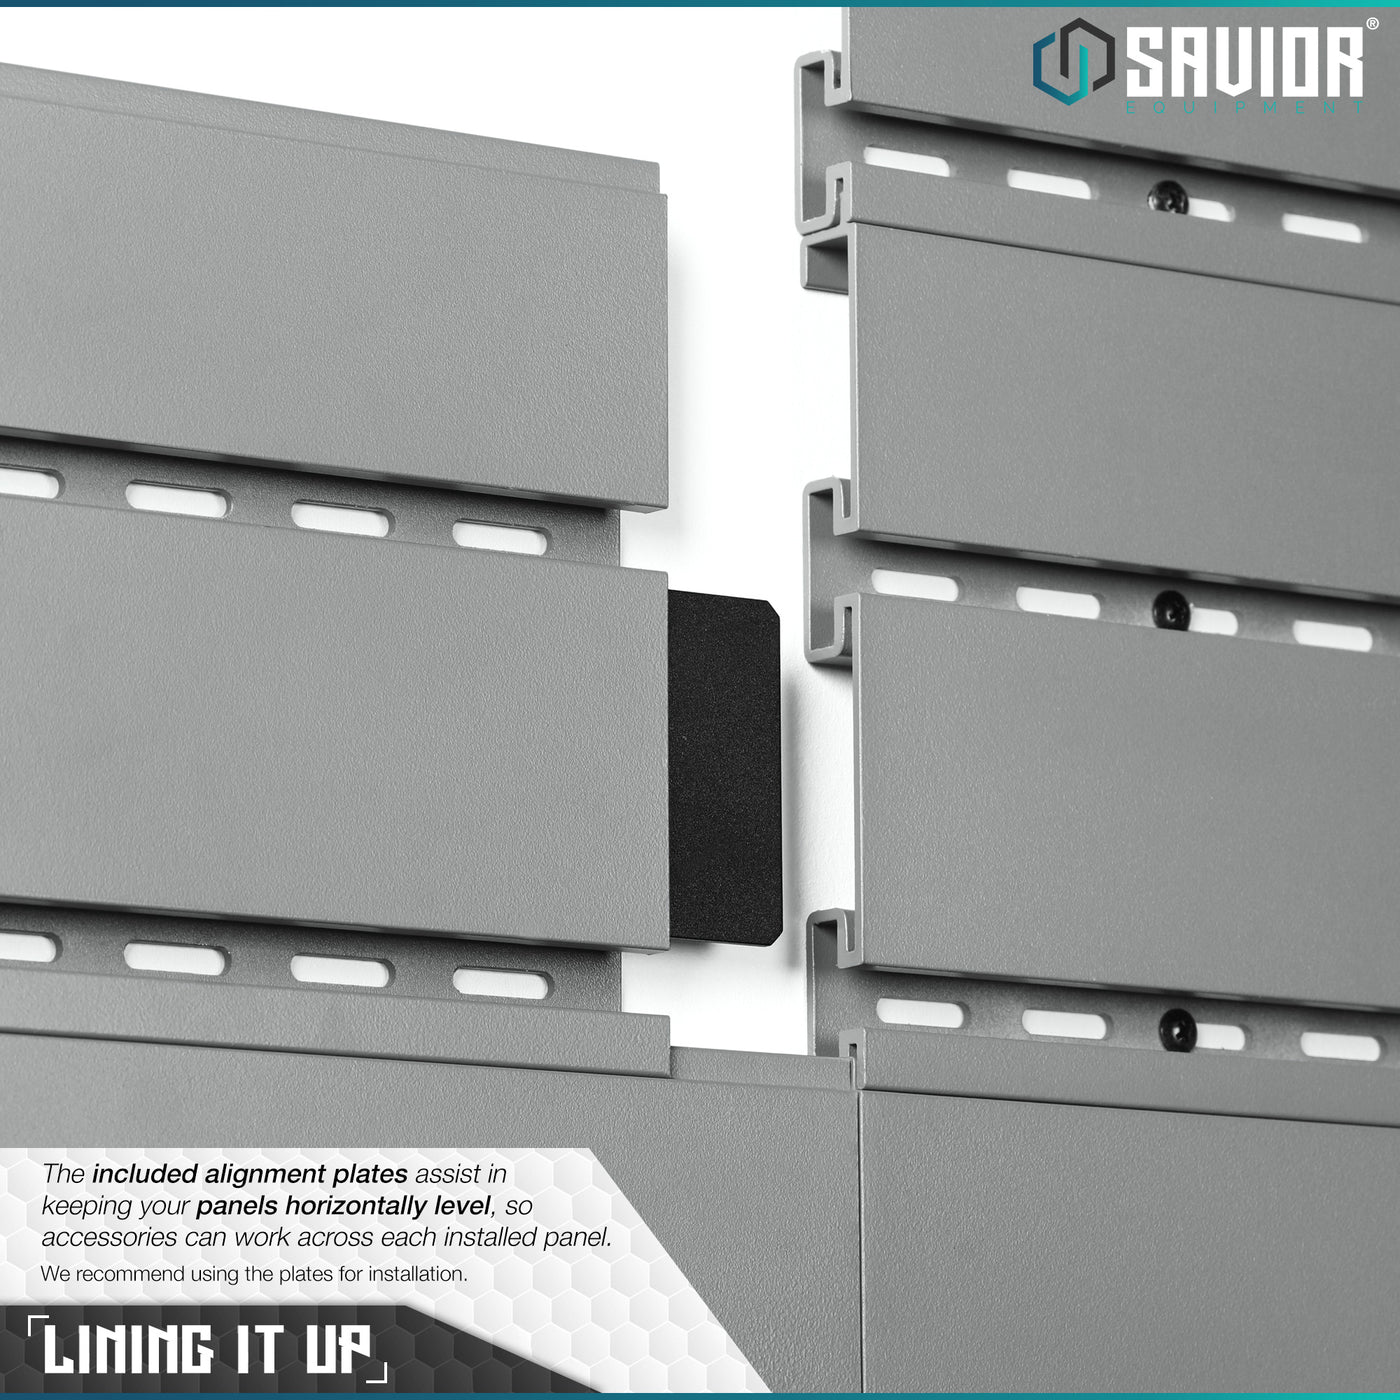 Lining It Up - The included alignment plates assist in keeping your panels horizontally level, so accessories can work across each installed panel. We recommend using the plates for installation.